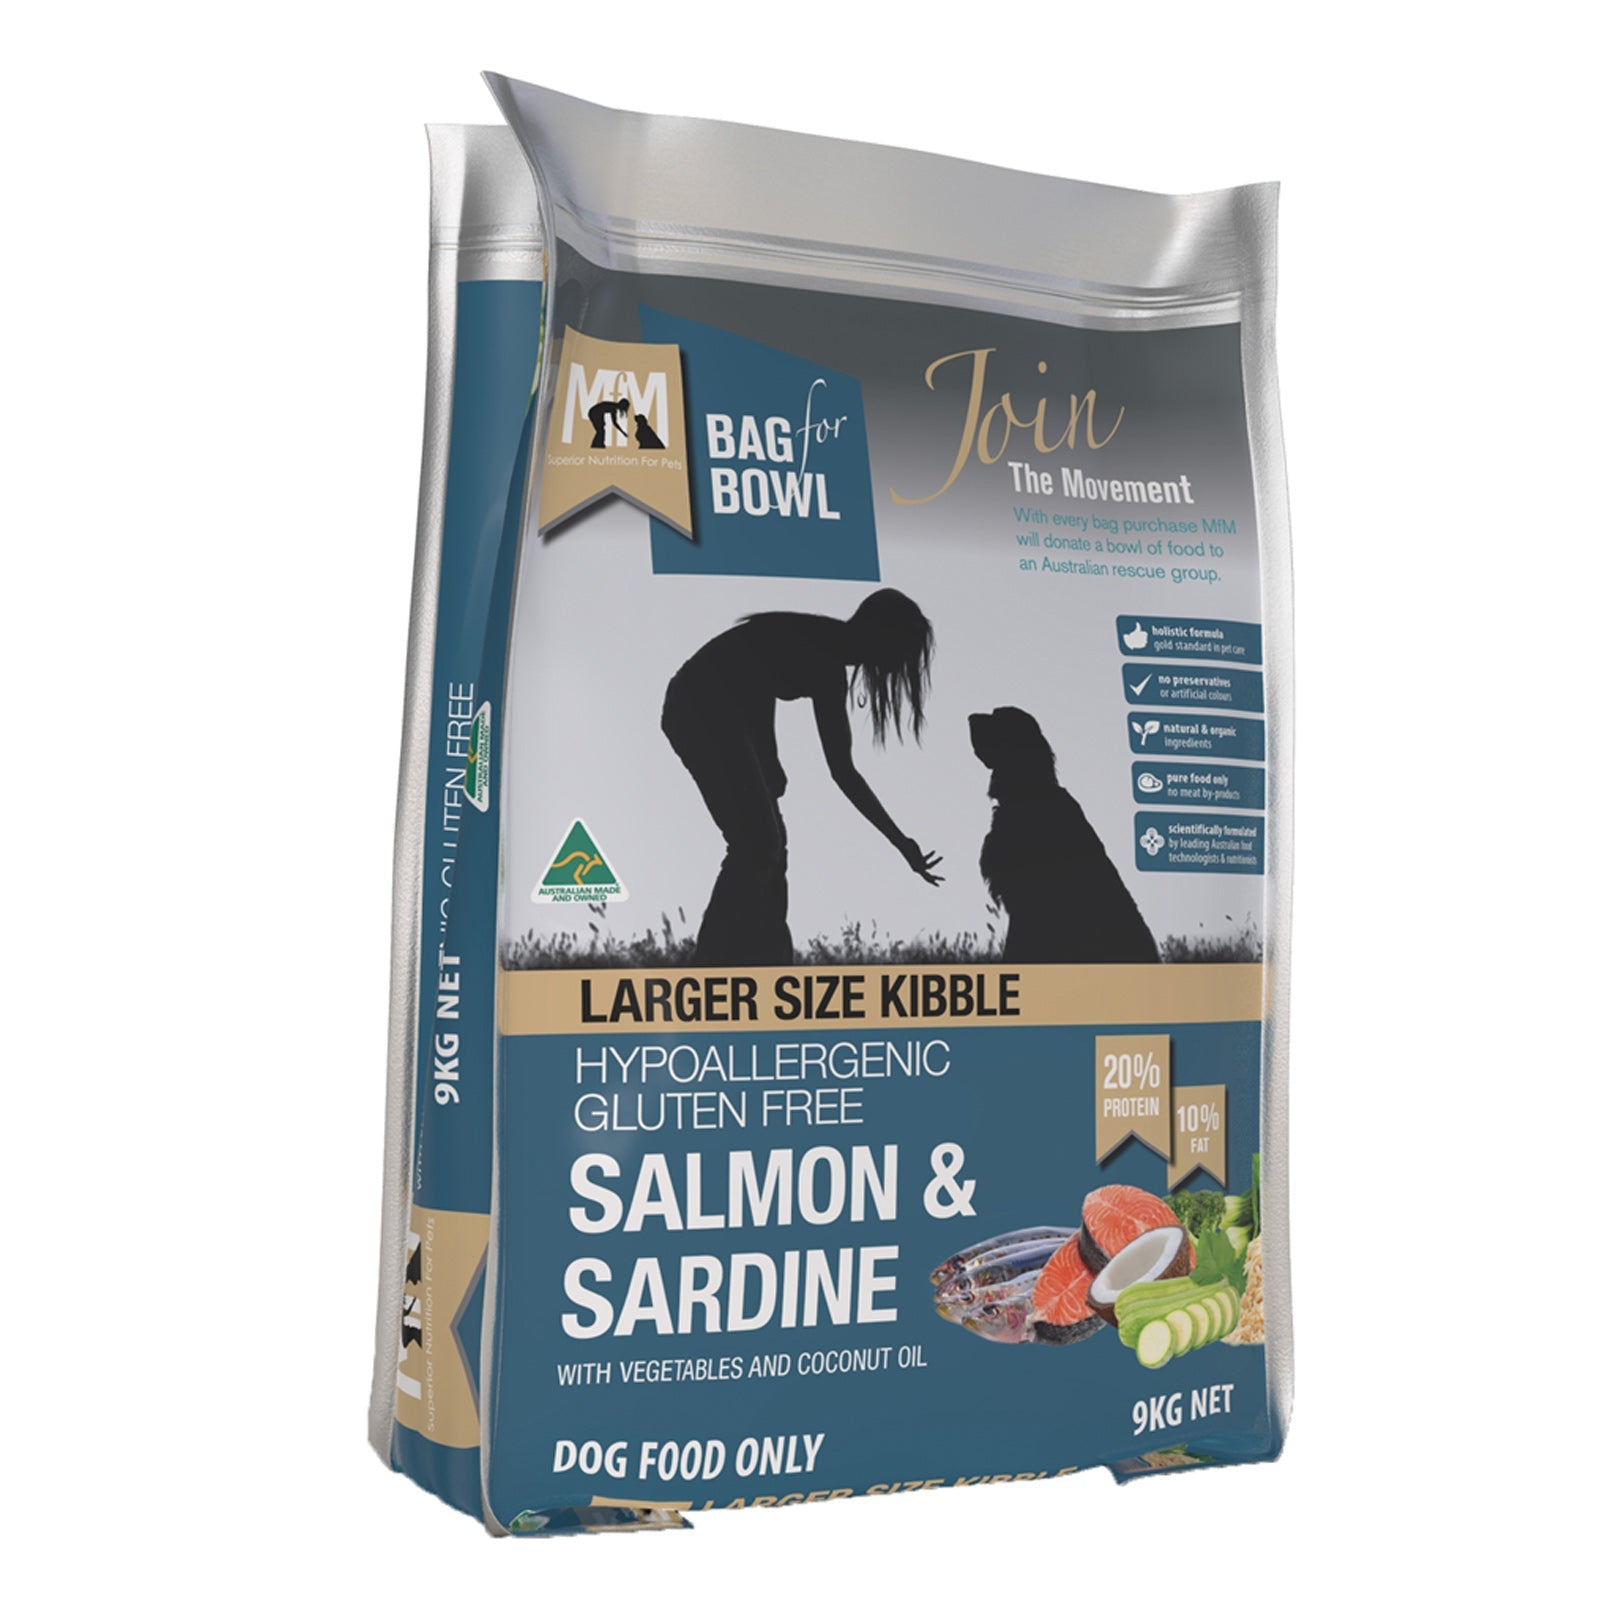 Meals For Mutts Dry Dog Food Large Breed Salmon & Sardine 9kg - Woonona Petfood & Produce